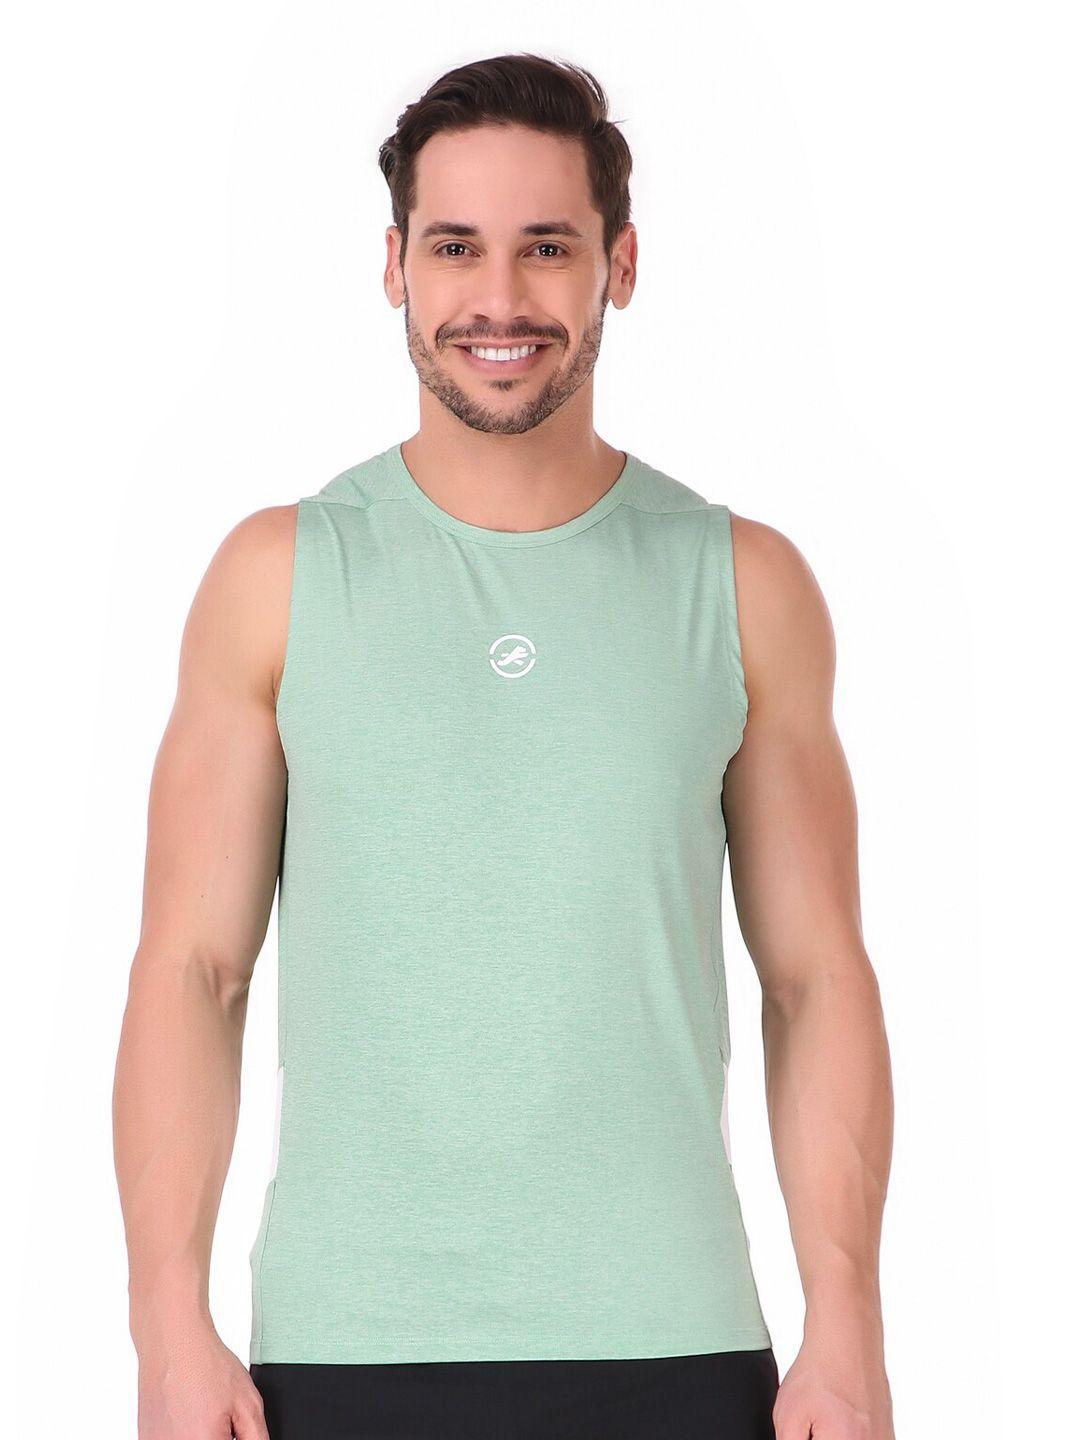 redesign round neck sleeveless dry fit t-shirt